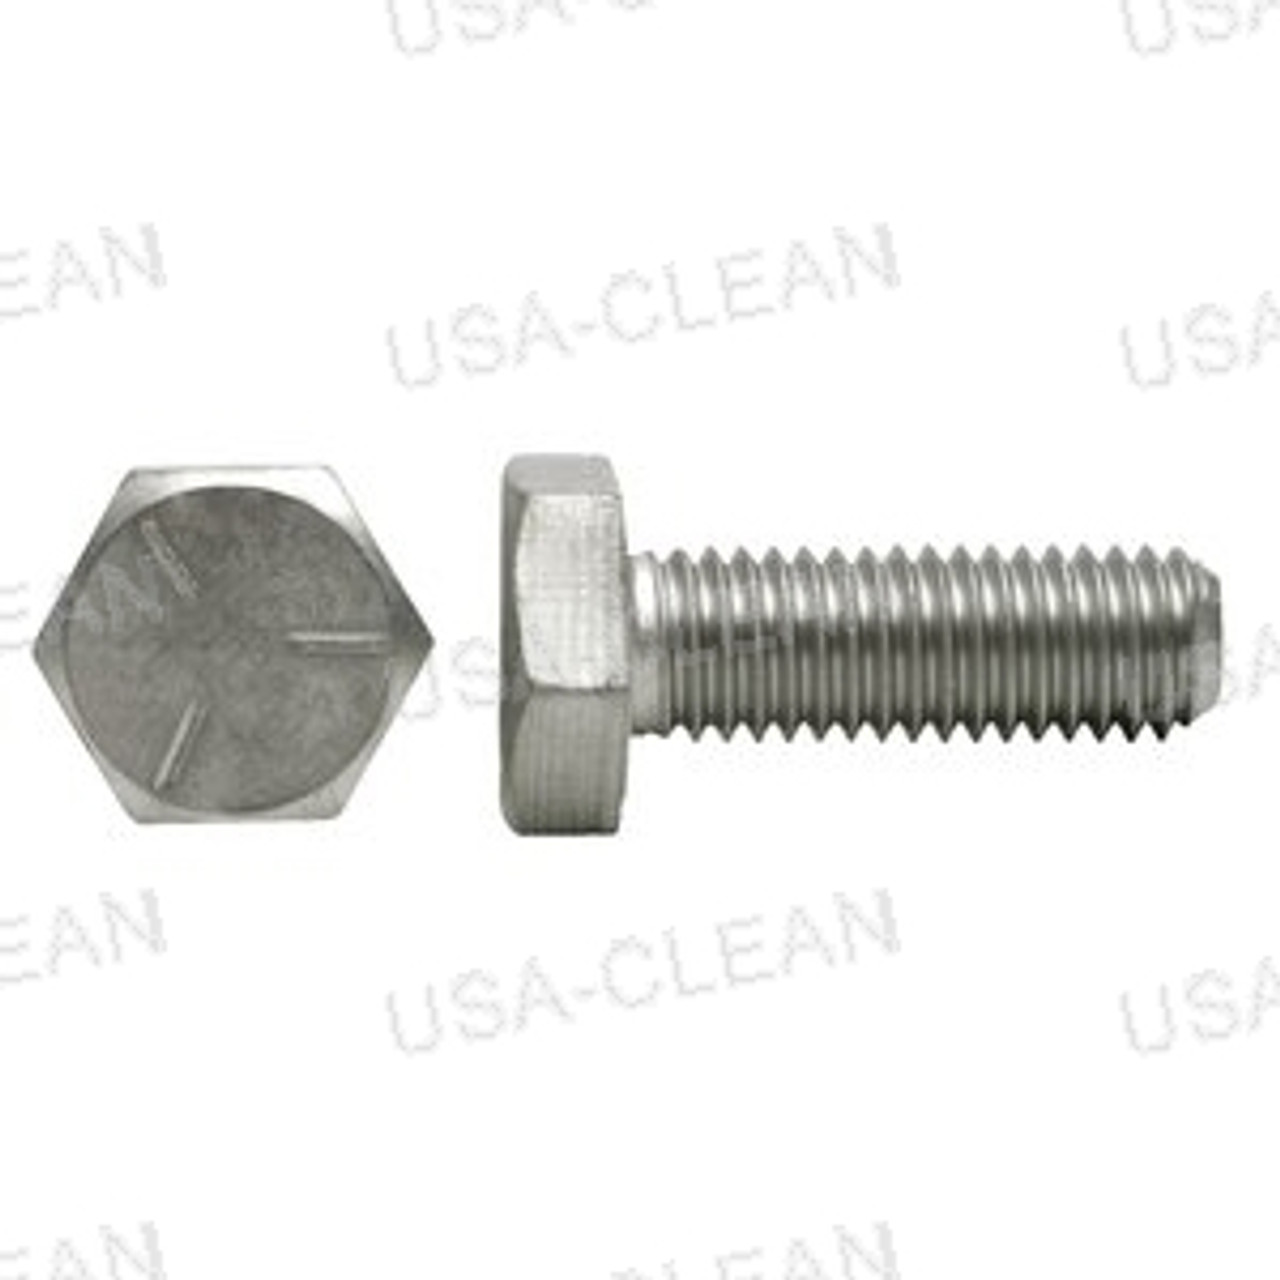 Bolt 3/8-16 x hex head grade zinc plated 999-0038 – Ships Fast from Our  Huge Inventory USA-CLEAN